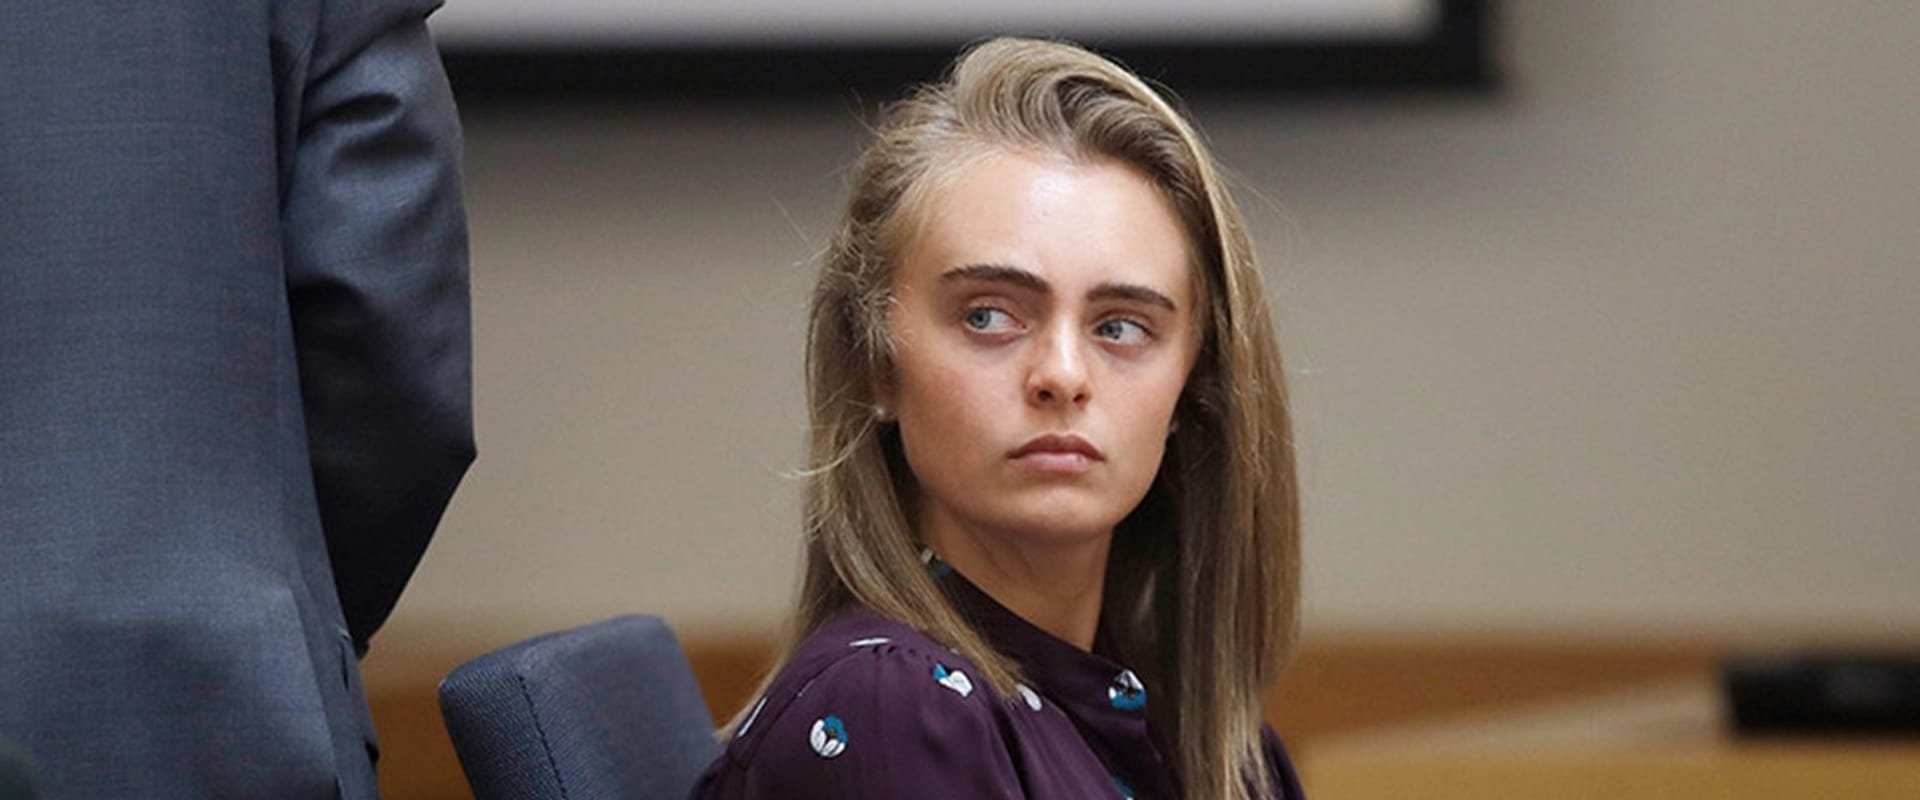 I Love You, Now Die: The Commonwealth v. Michelle Carter